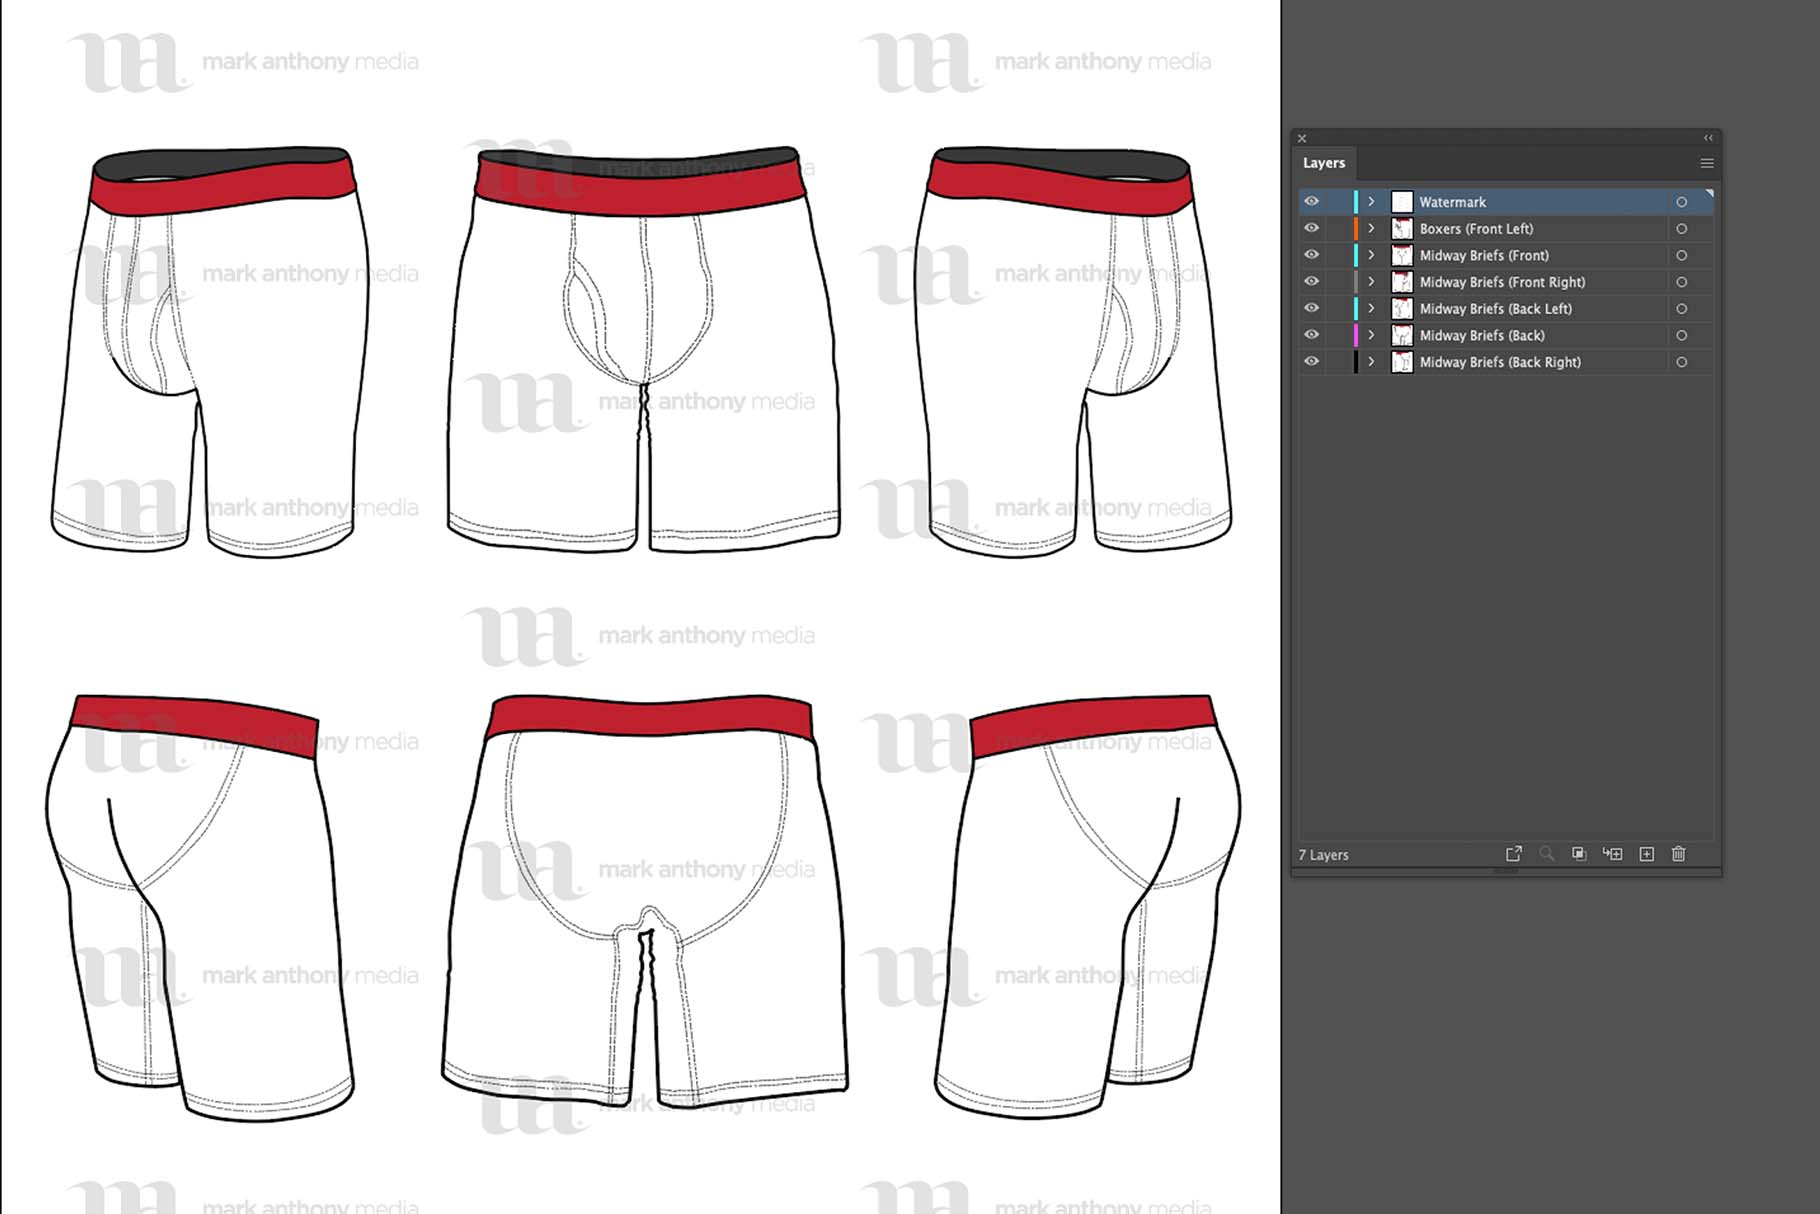 Briefs/Underwear - Vector Template Mockup by Mark Anthony Rudder on Dribbble